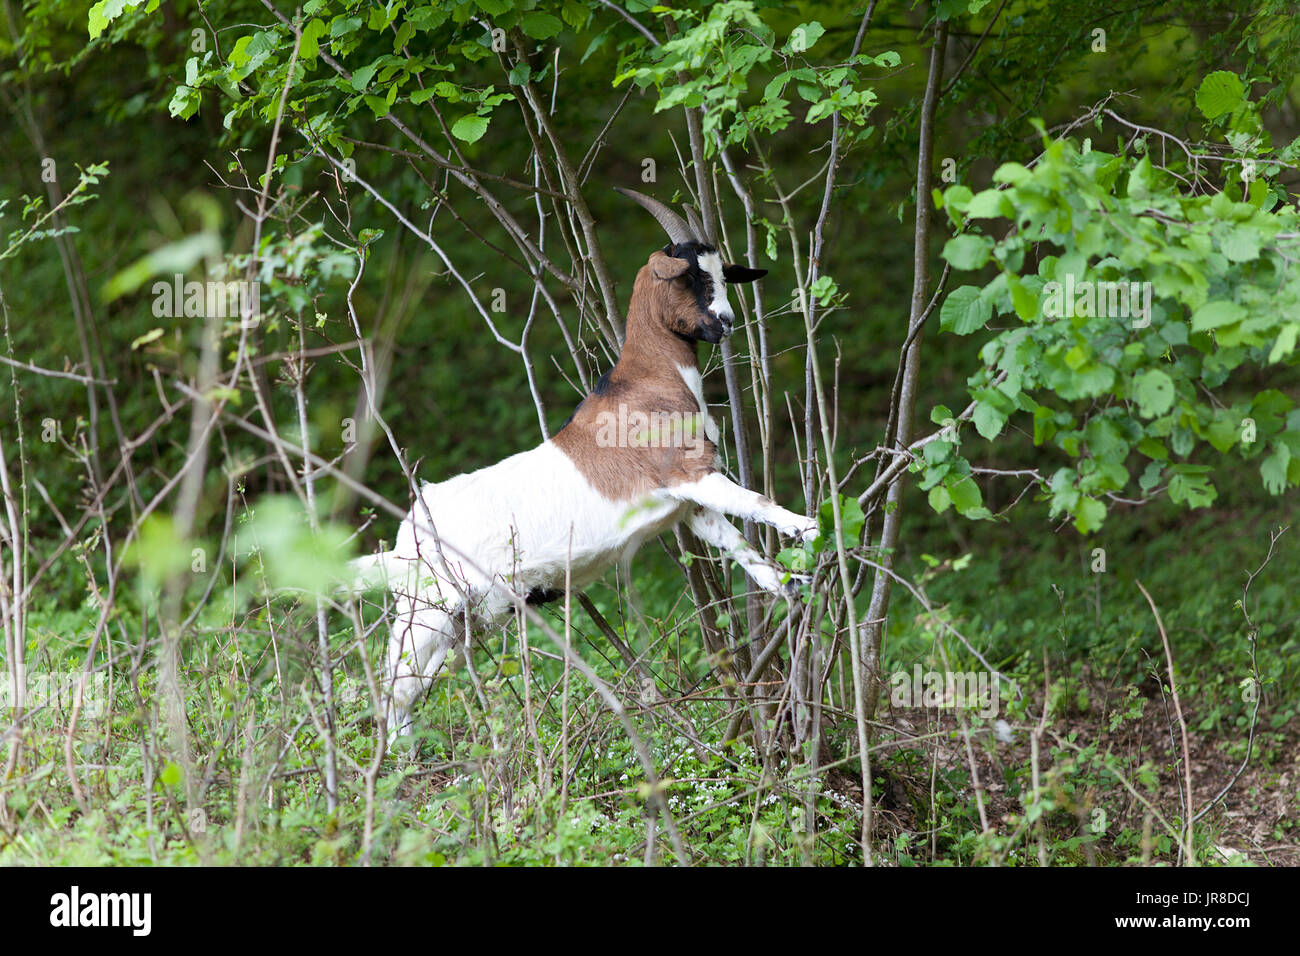 goat in forest climb up a tree to eat leaves Stock Photo